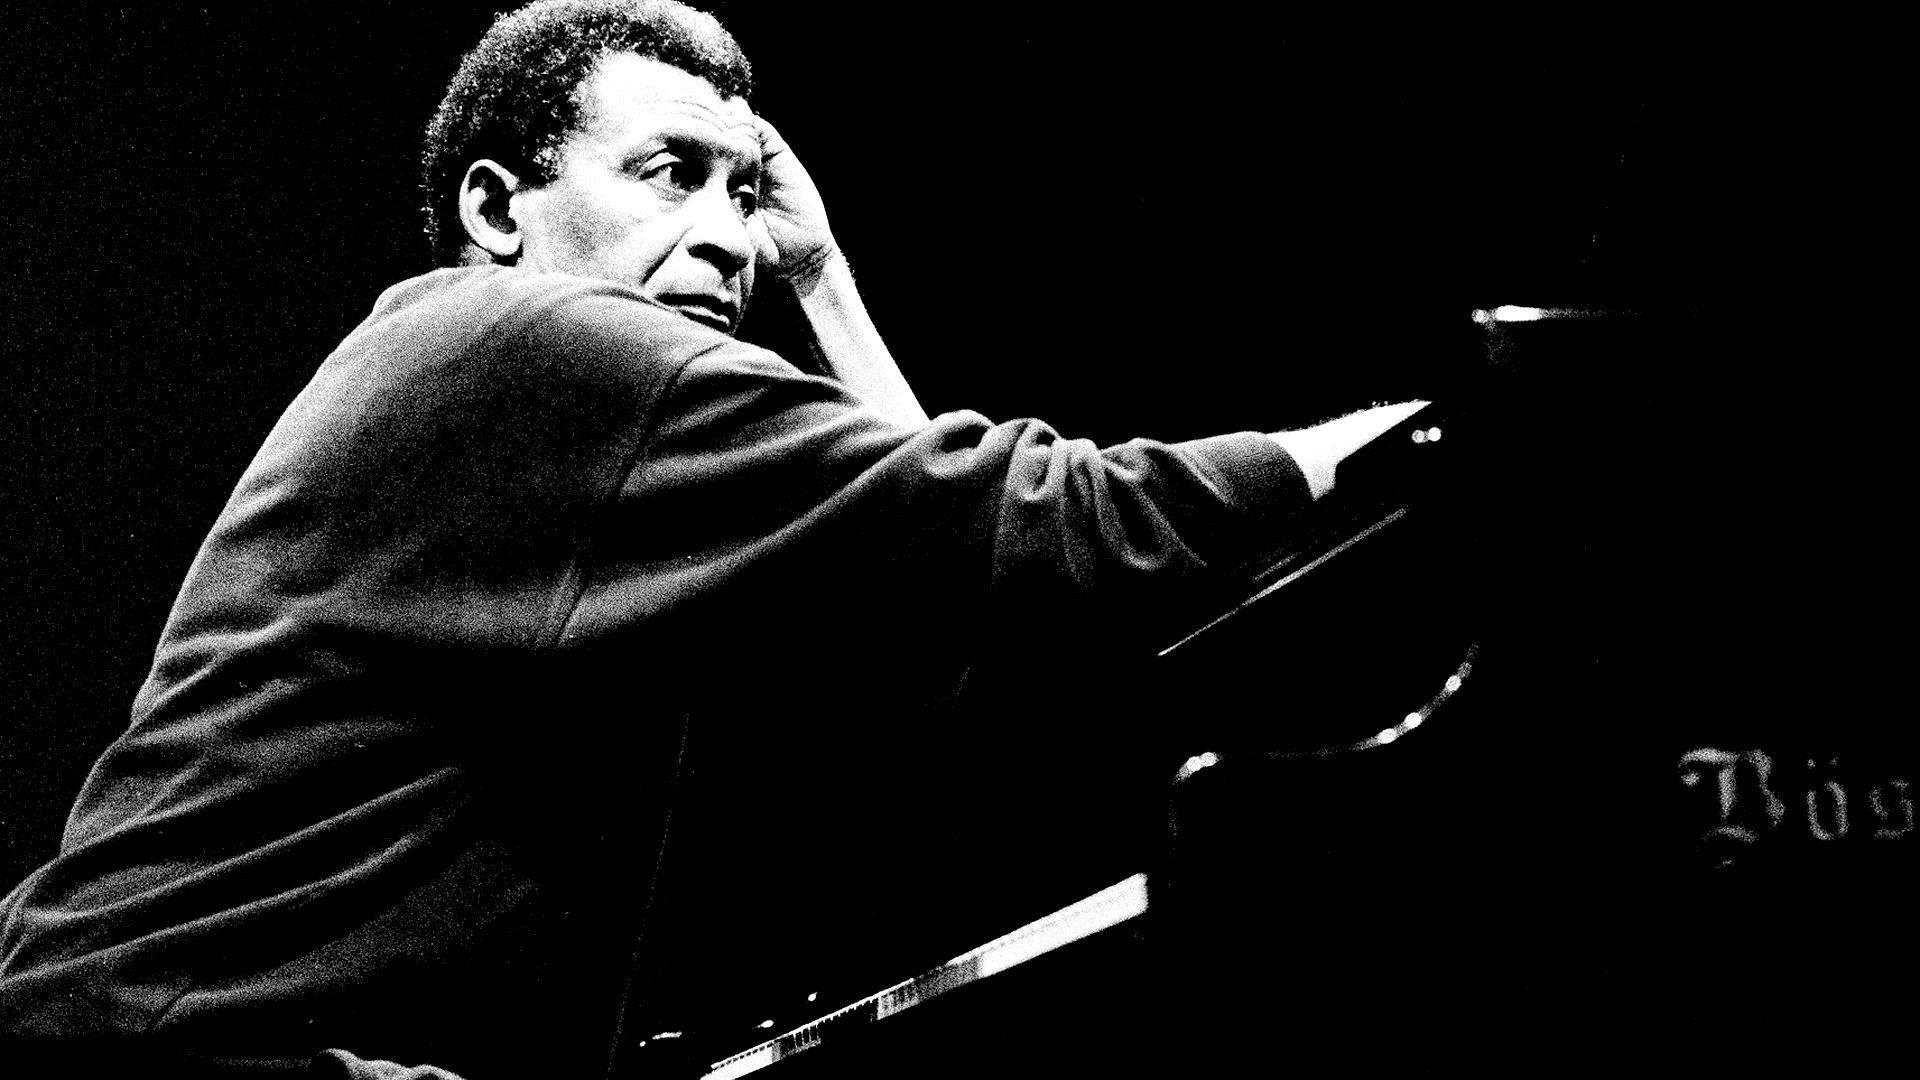  Happy birthday Abdullah Ibrahim! 

The great South African pianist and composer is 86 today. 